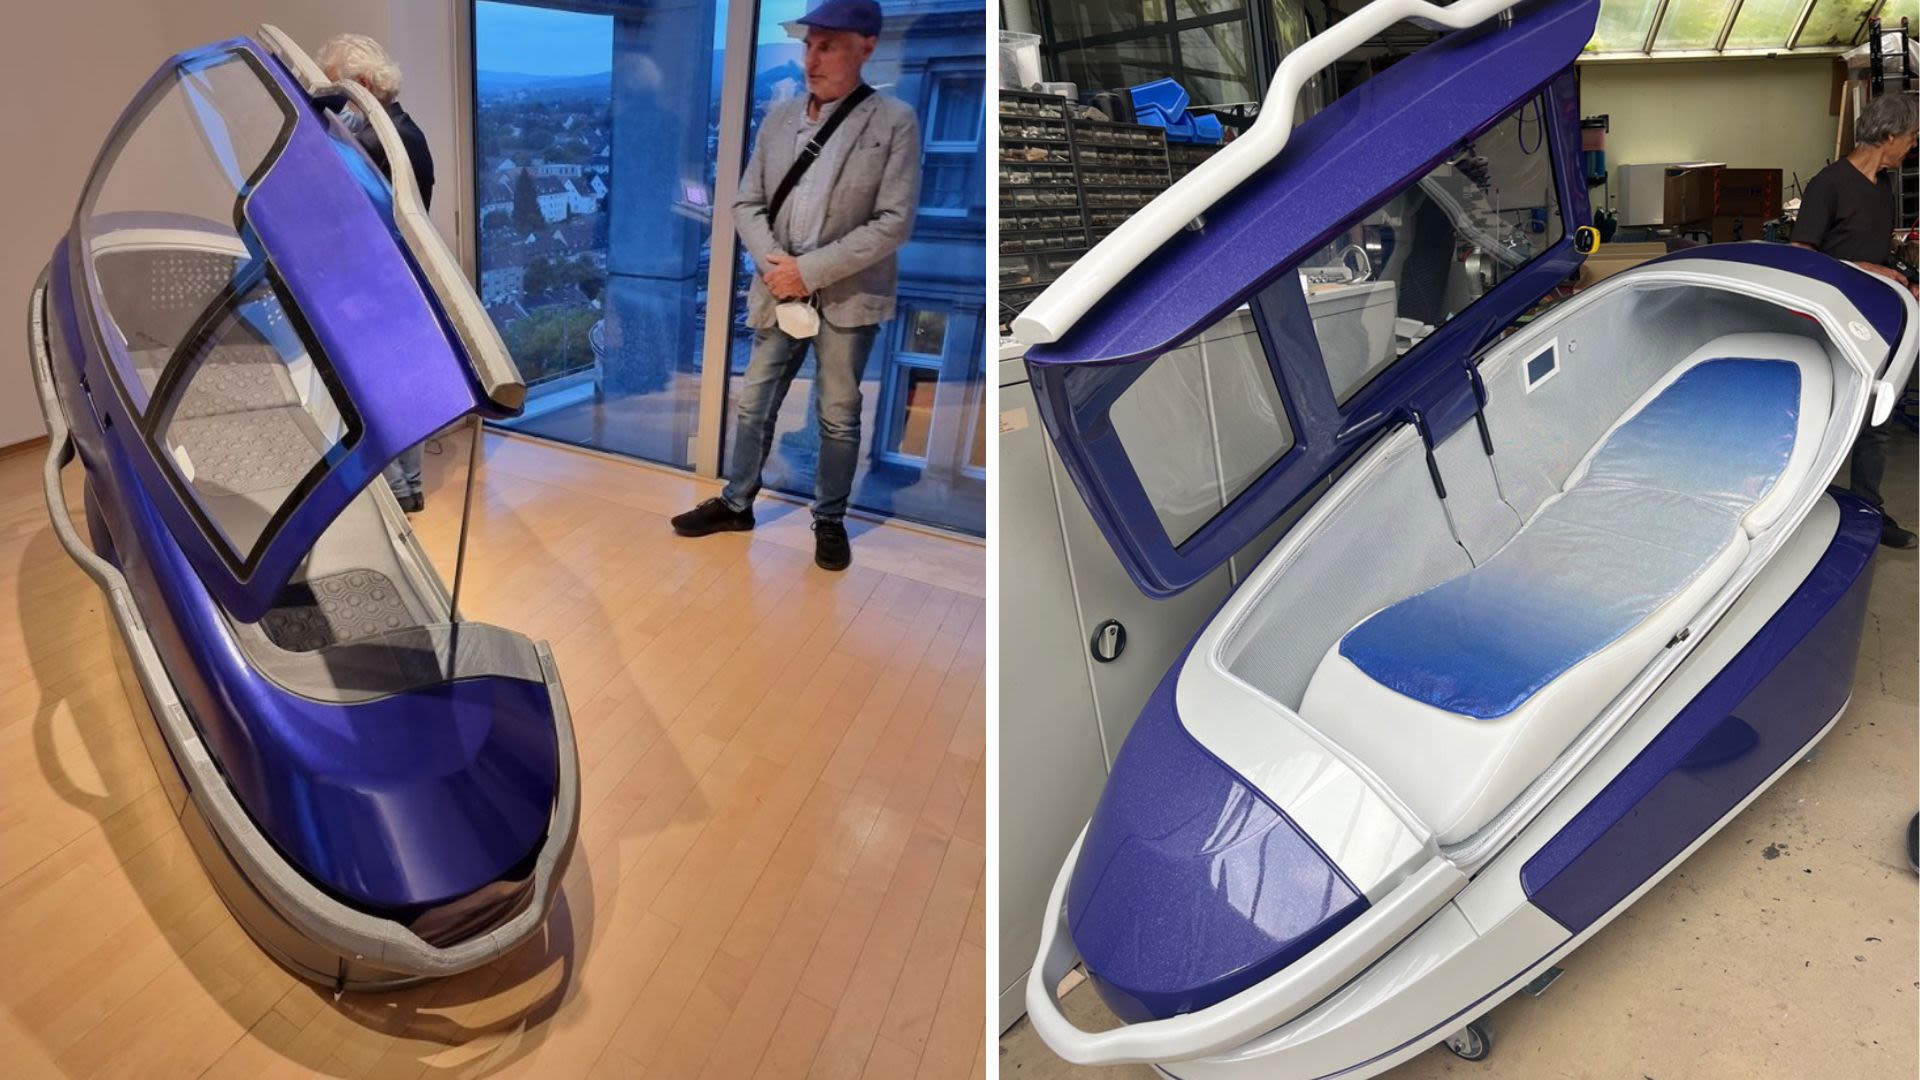 1st space-age-looking suicide pod to be used ‘soon’ in Switzerland